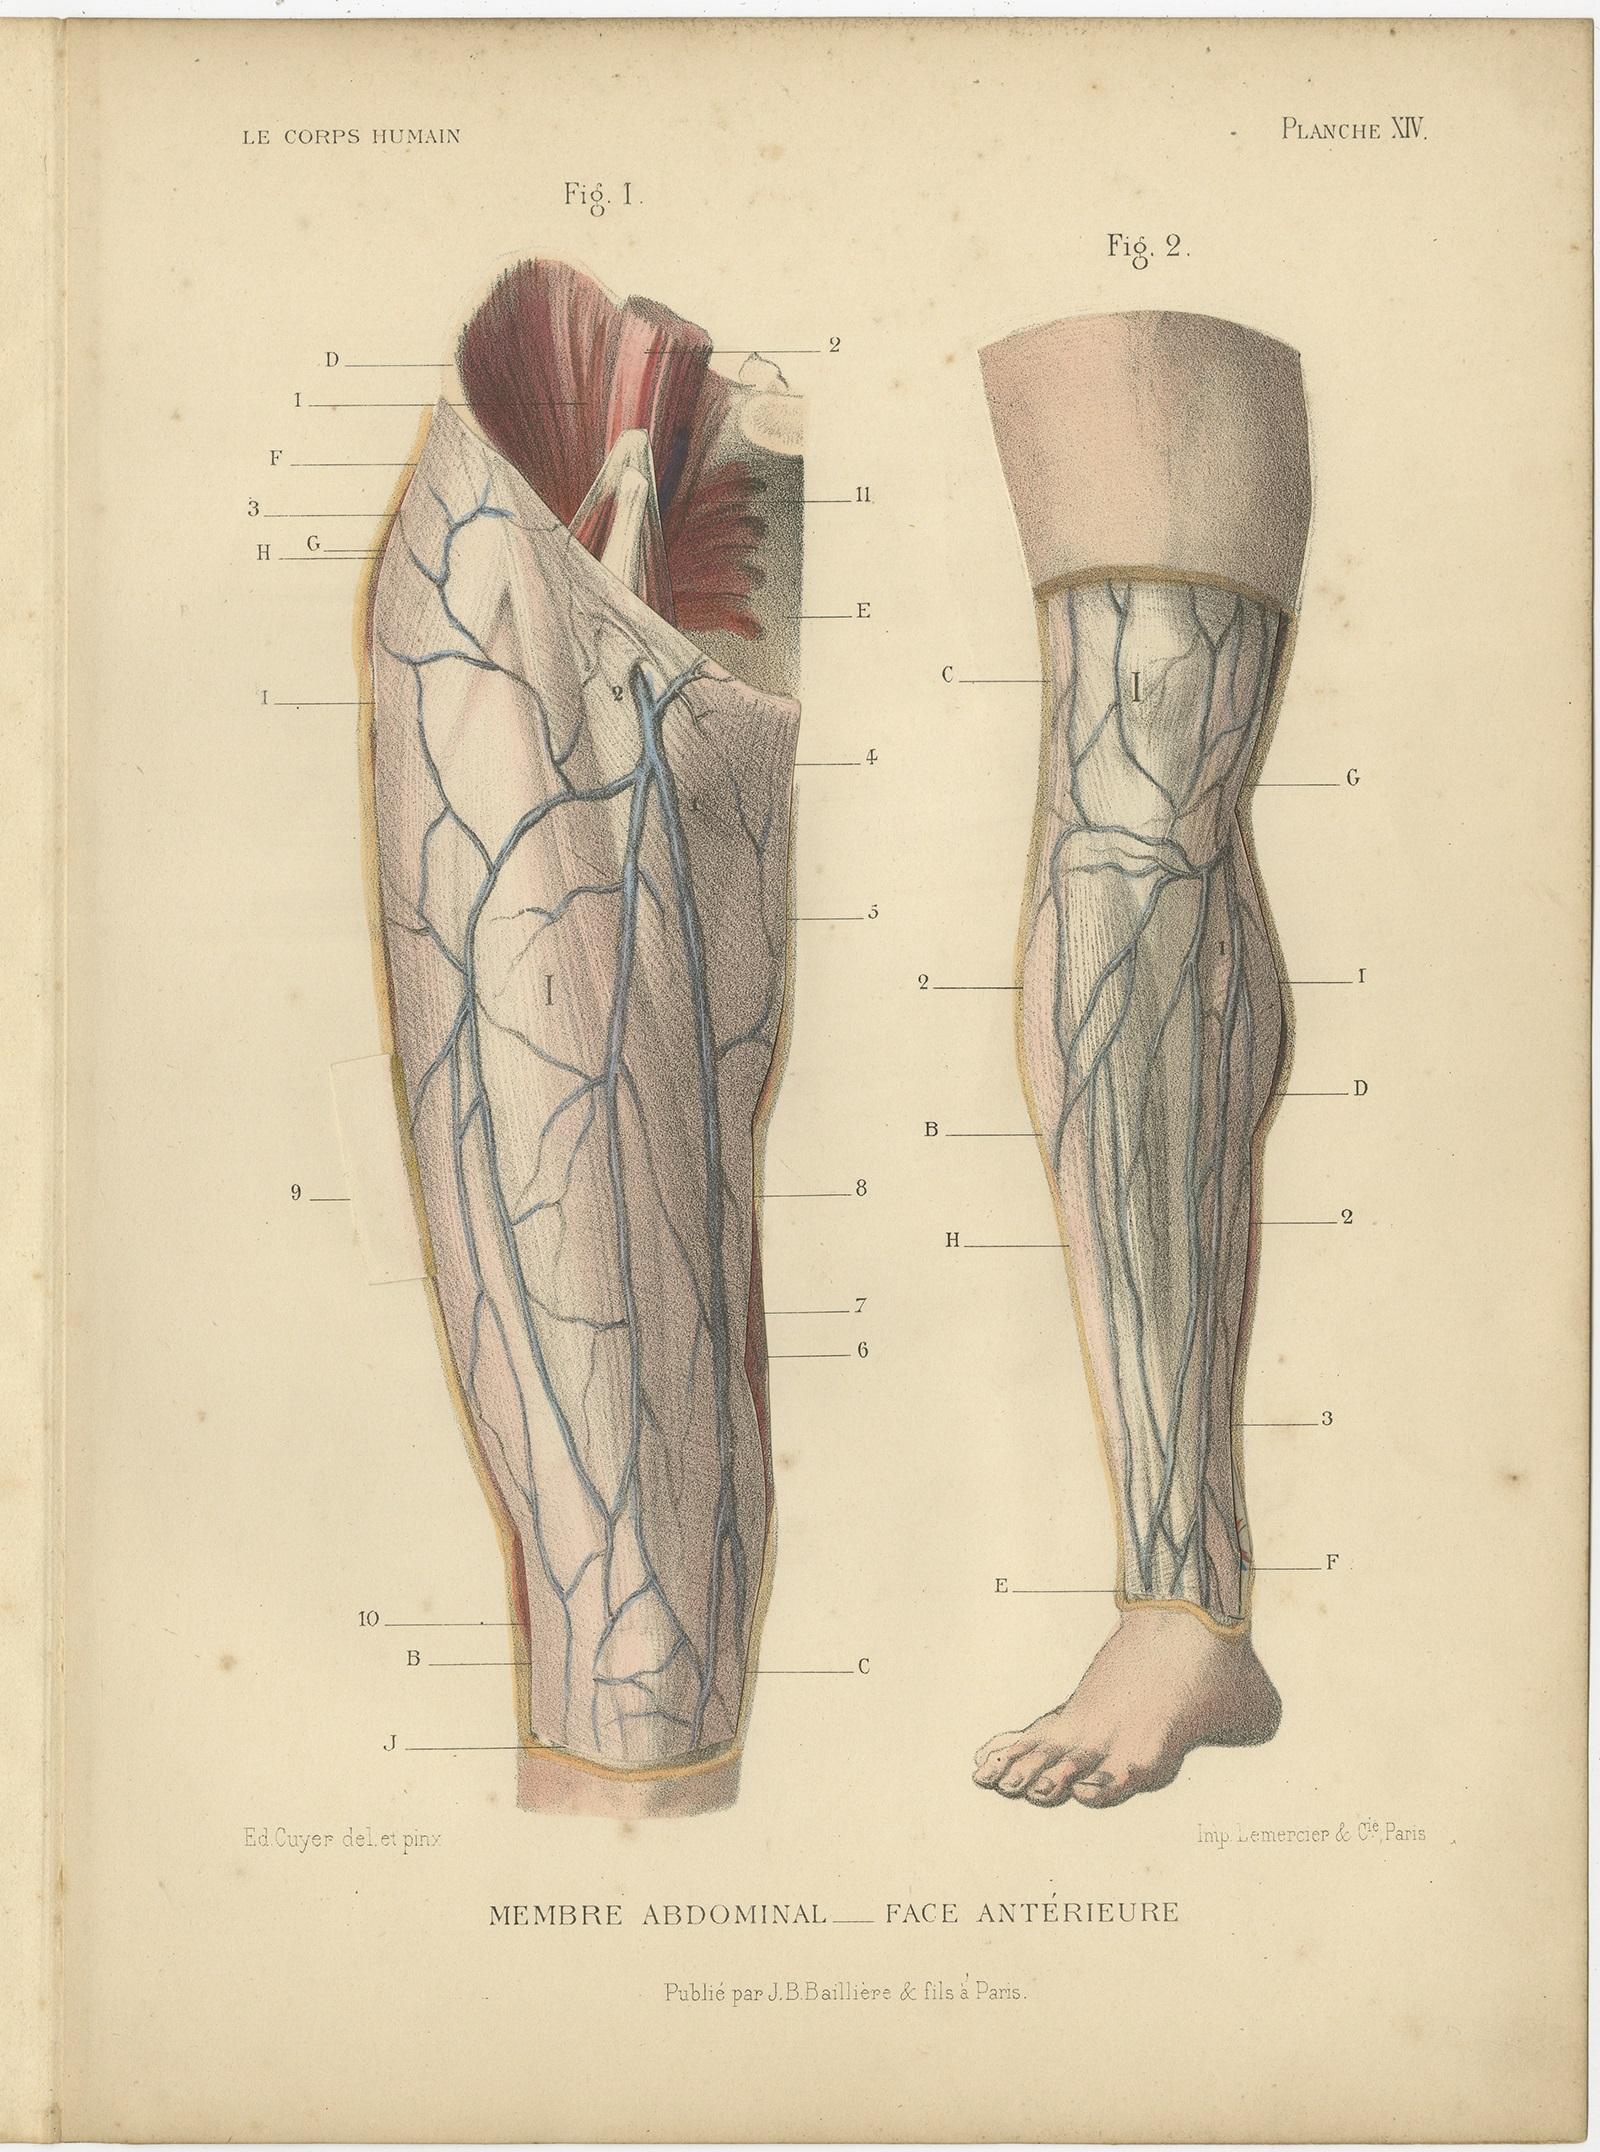 Set of four antique anatomy prints titled 'Membre Abdominal'. Colored lithographs of human legs with superimposed flaps. These prints originate from 'Le Corps Humain' by G.A. Kuhff. Illustrated by Edouard Cuyer.